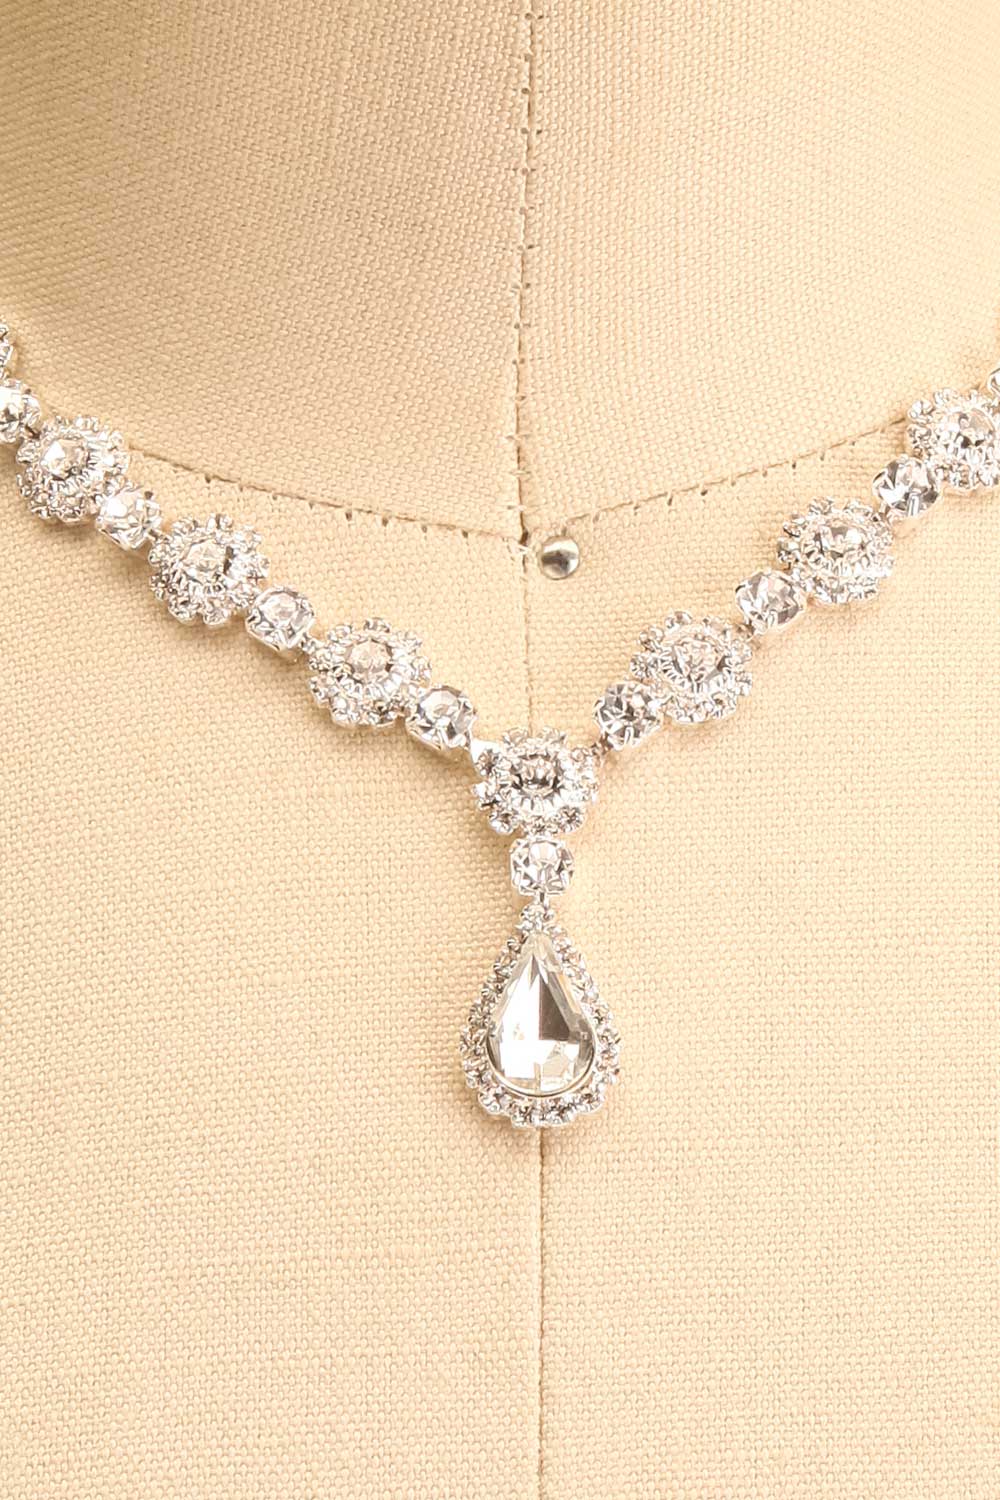 Radelle Silver Necklace w/ Crystal Pendant | Boutique 1861 close-up